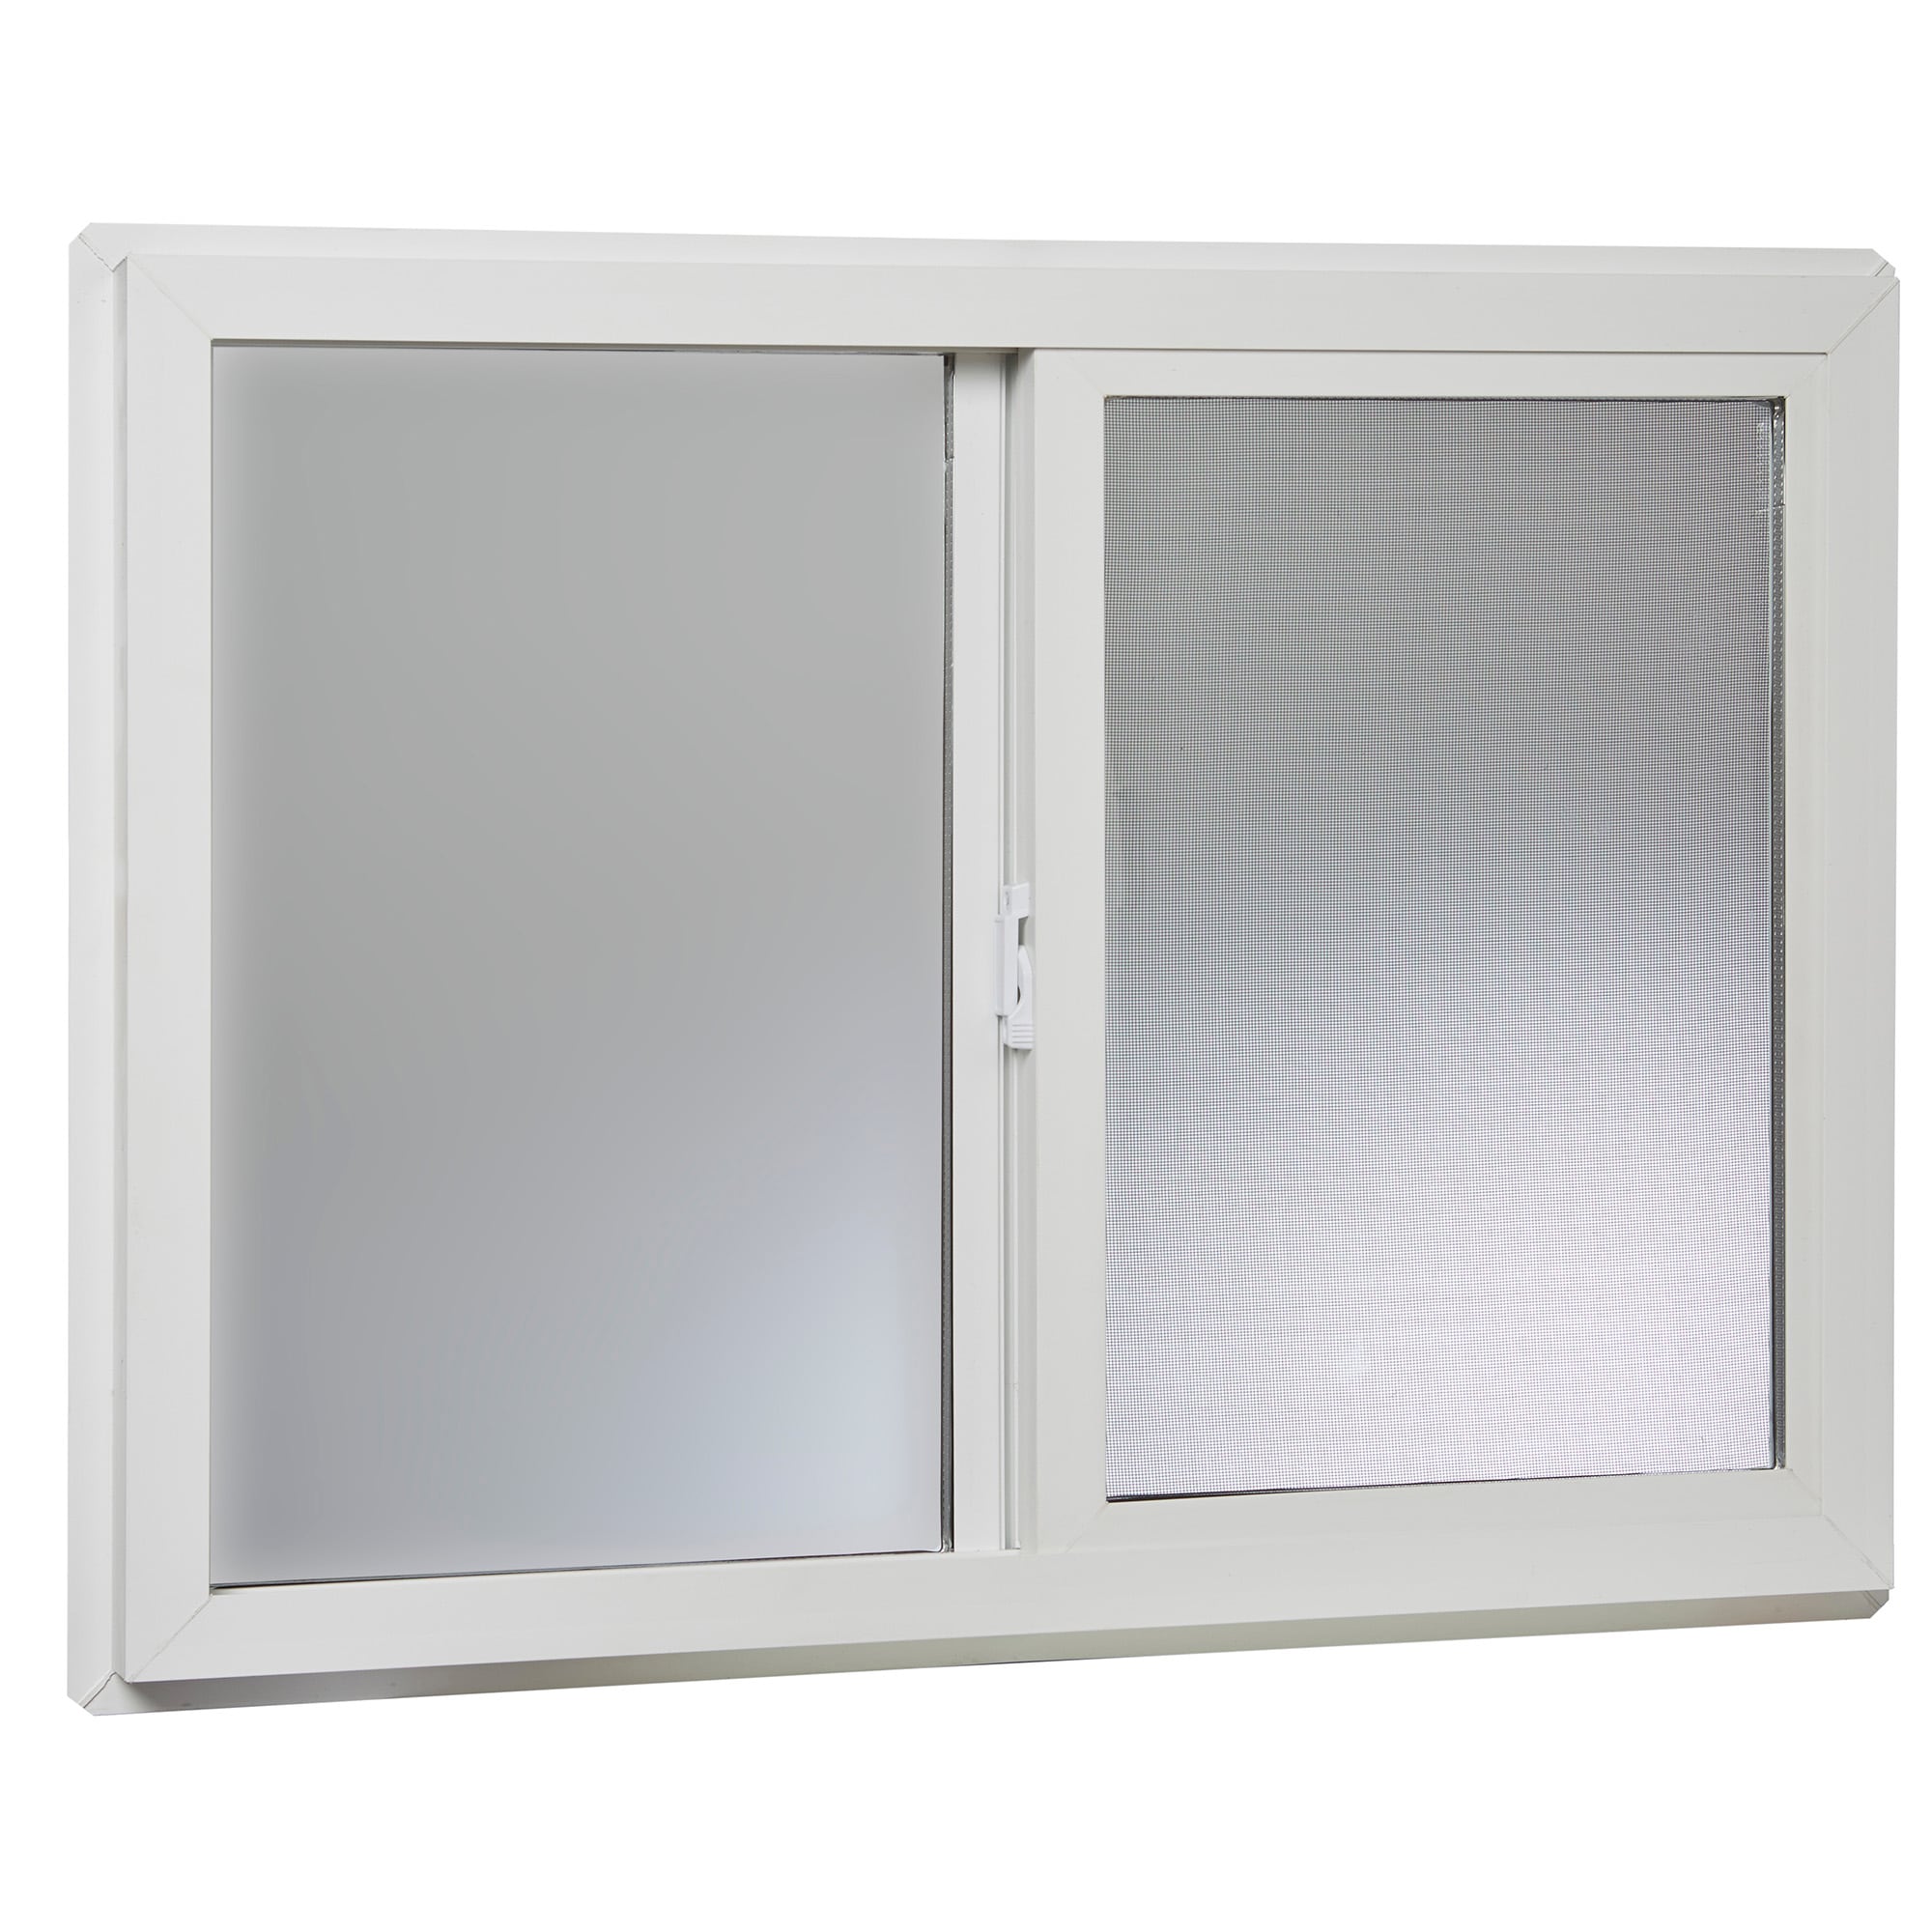 Awning Window Screen 31.75 in Fully-Welded Vinyl White Finish x 18 in 